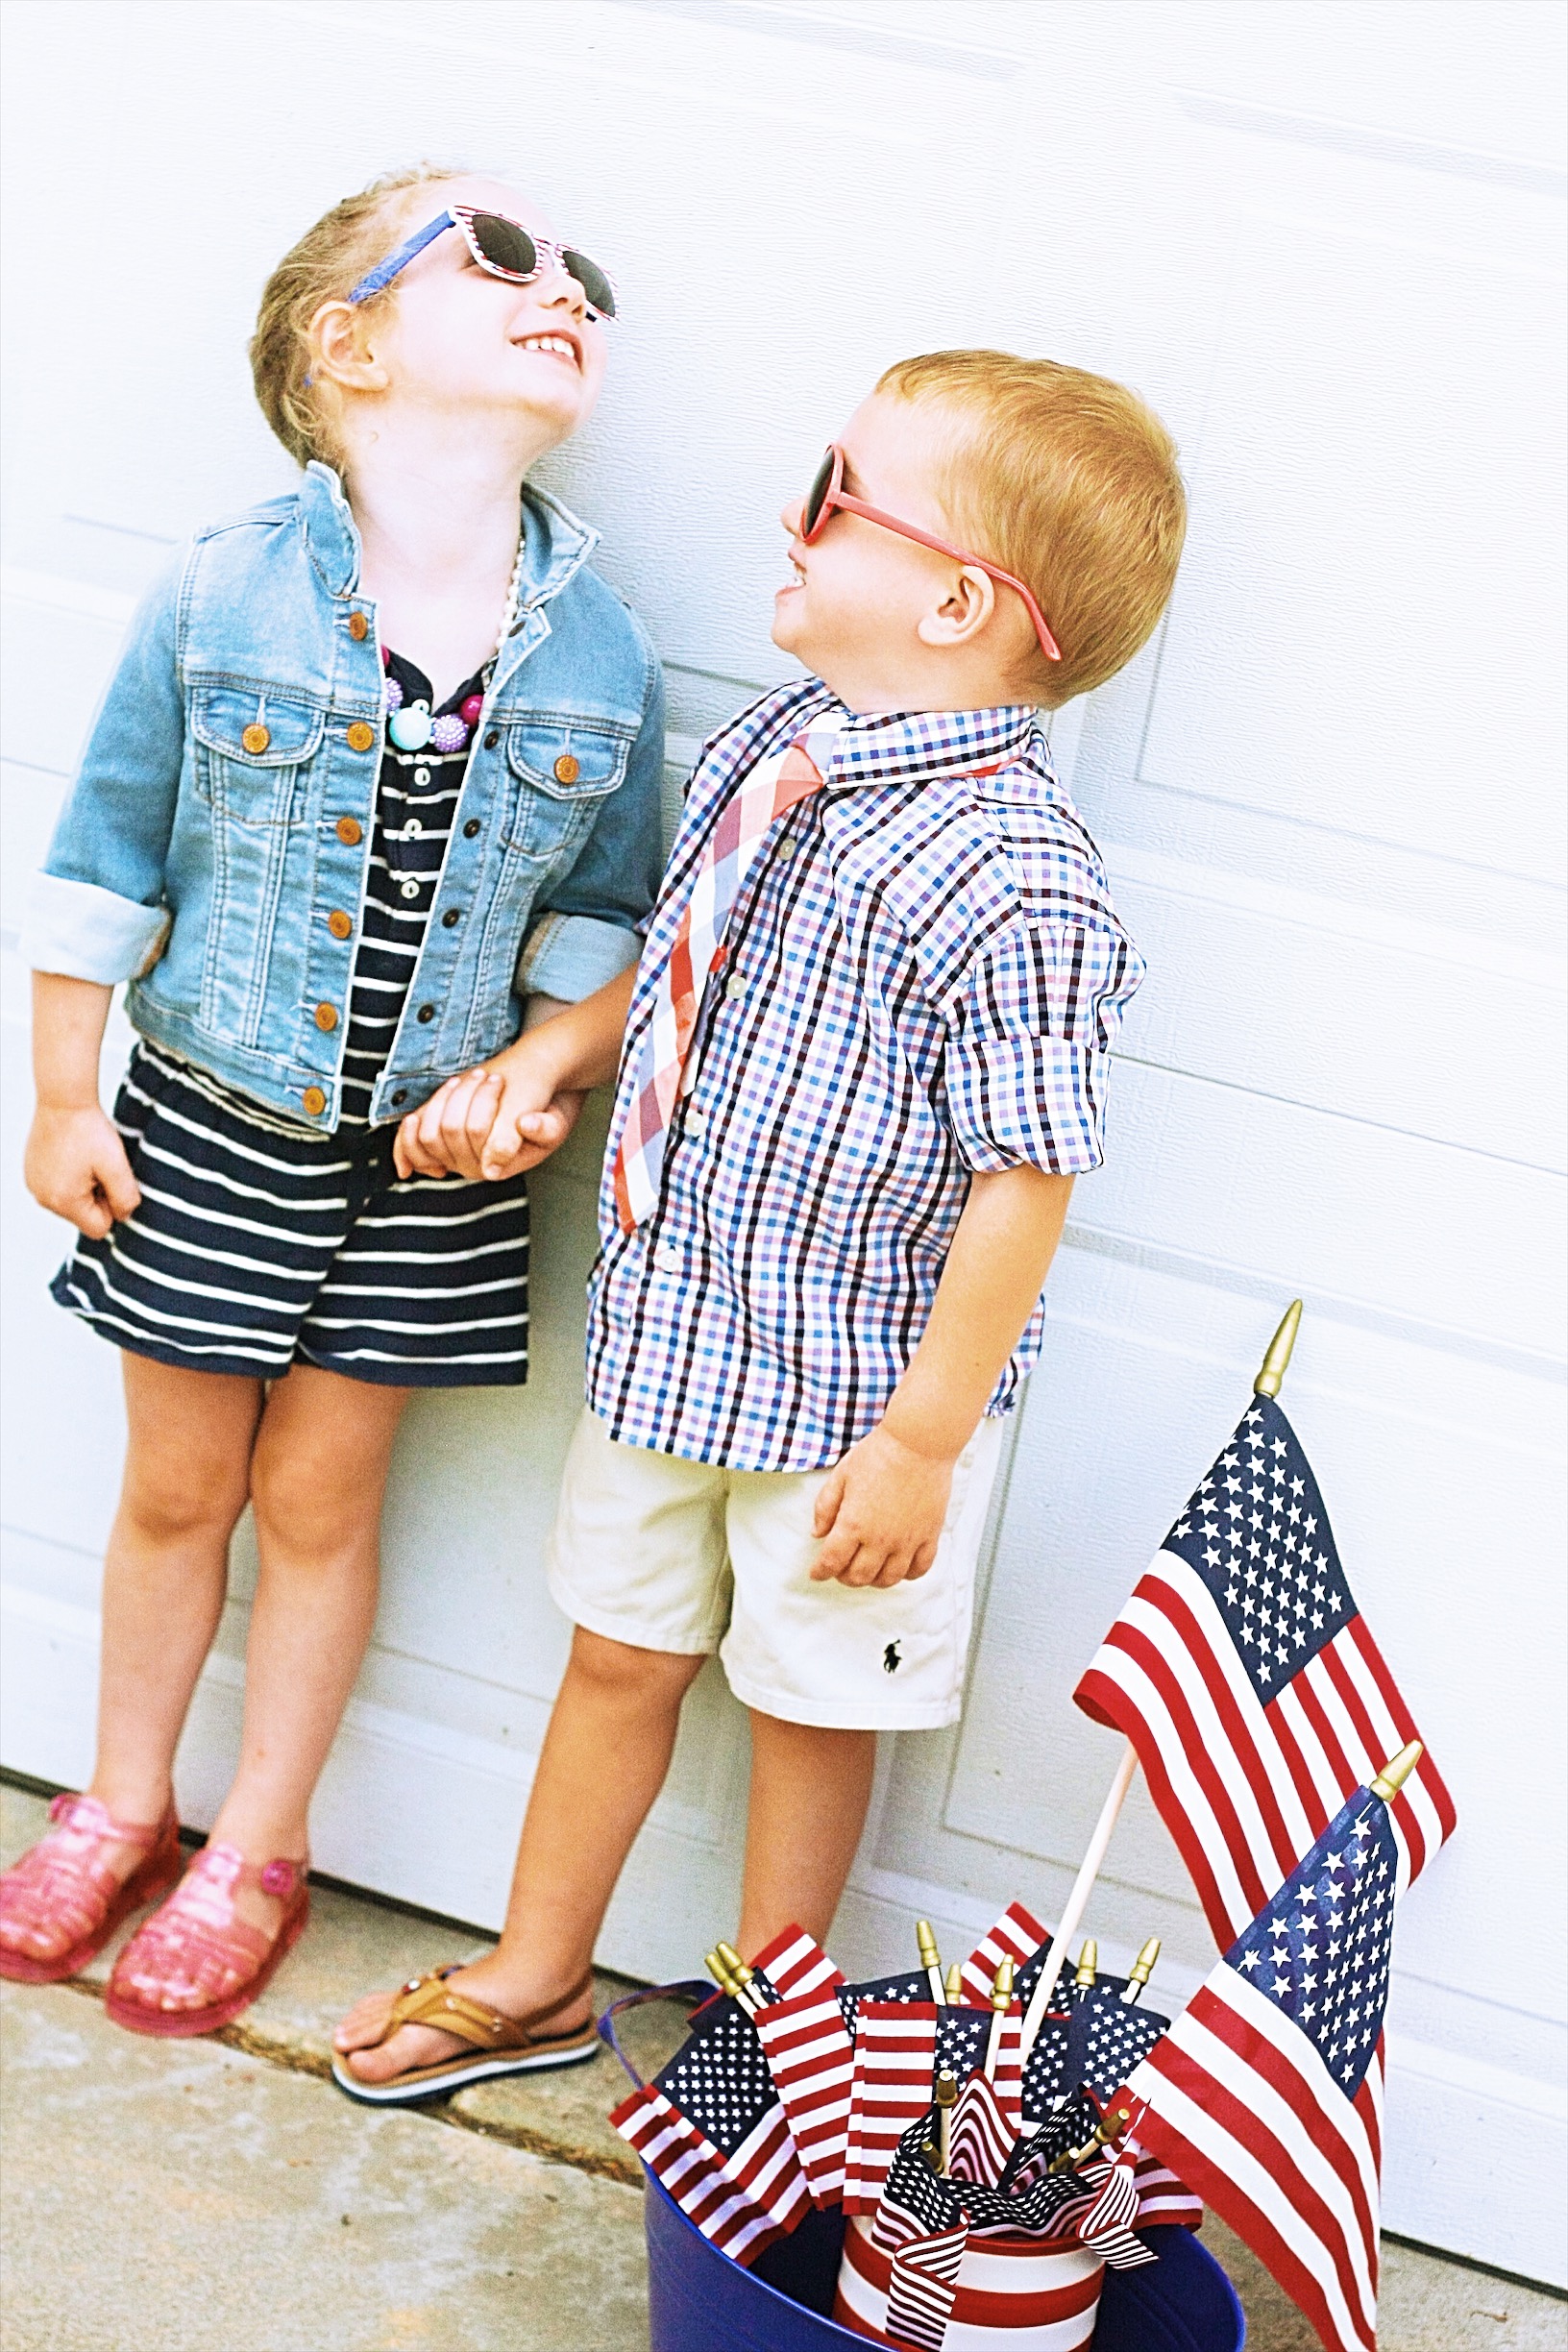 Nebraska Motherhood + Fashion blogger, Leslie of Tiny Stampede shares Fourth of July toddler outfits on sale from Ralph Lauren, Gap Kids and more | Browse this season's hottest colorful styles and patterns.